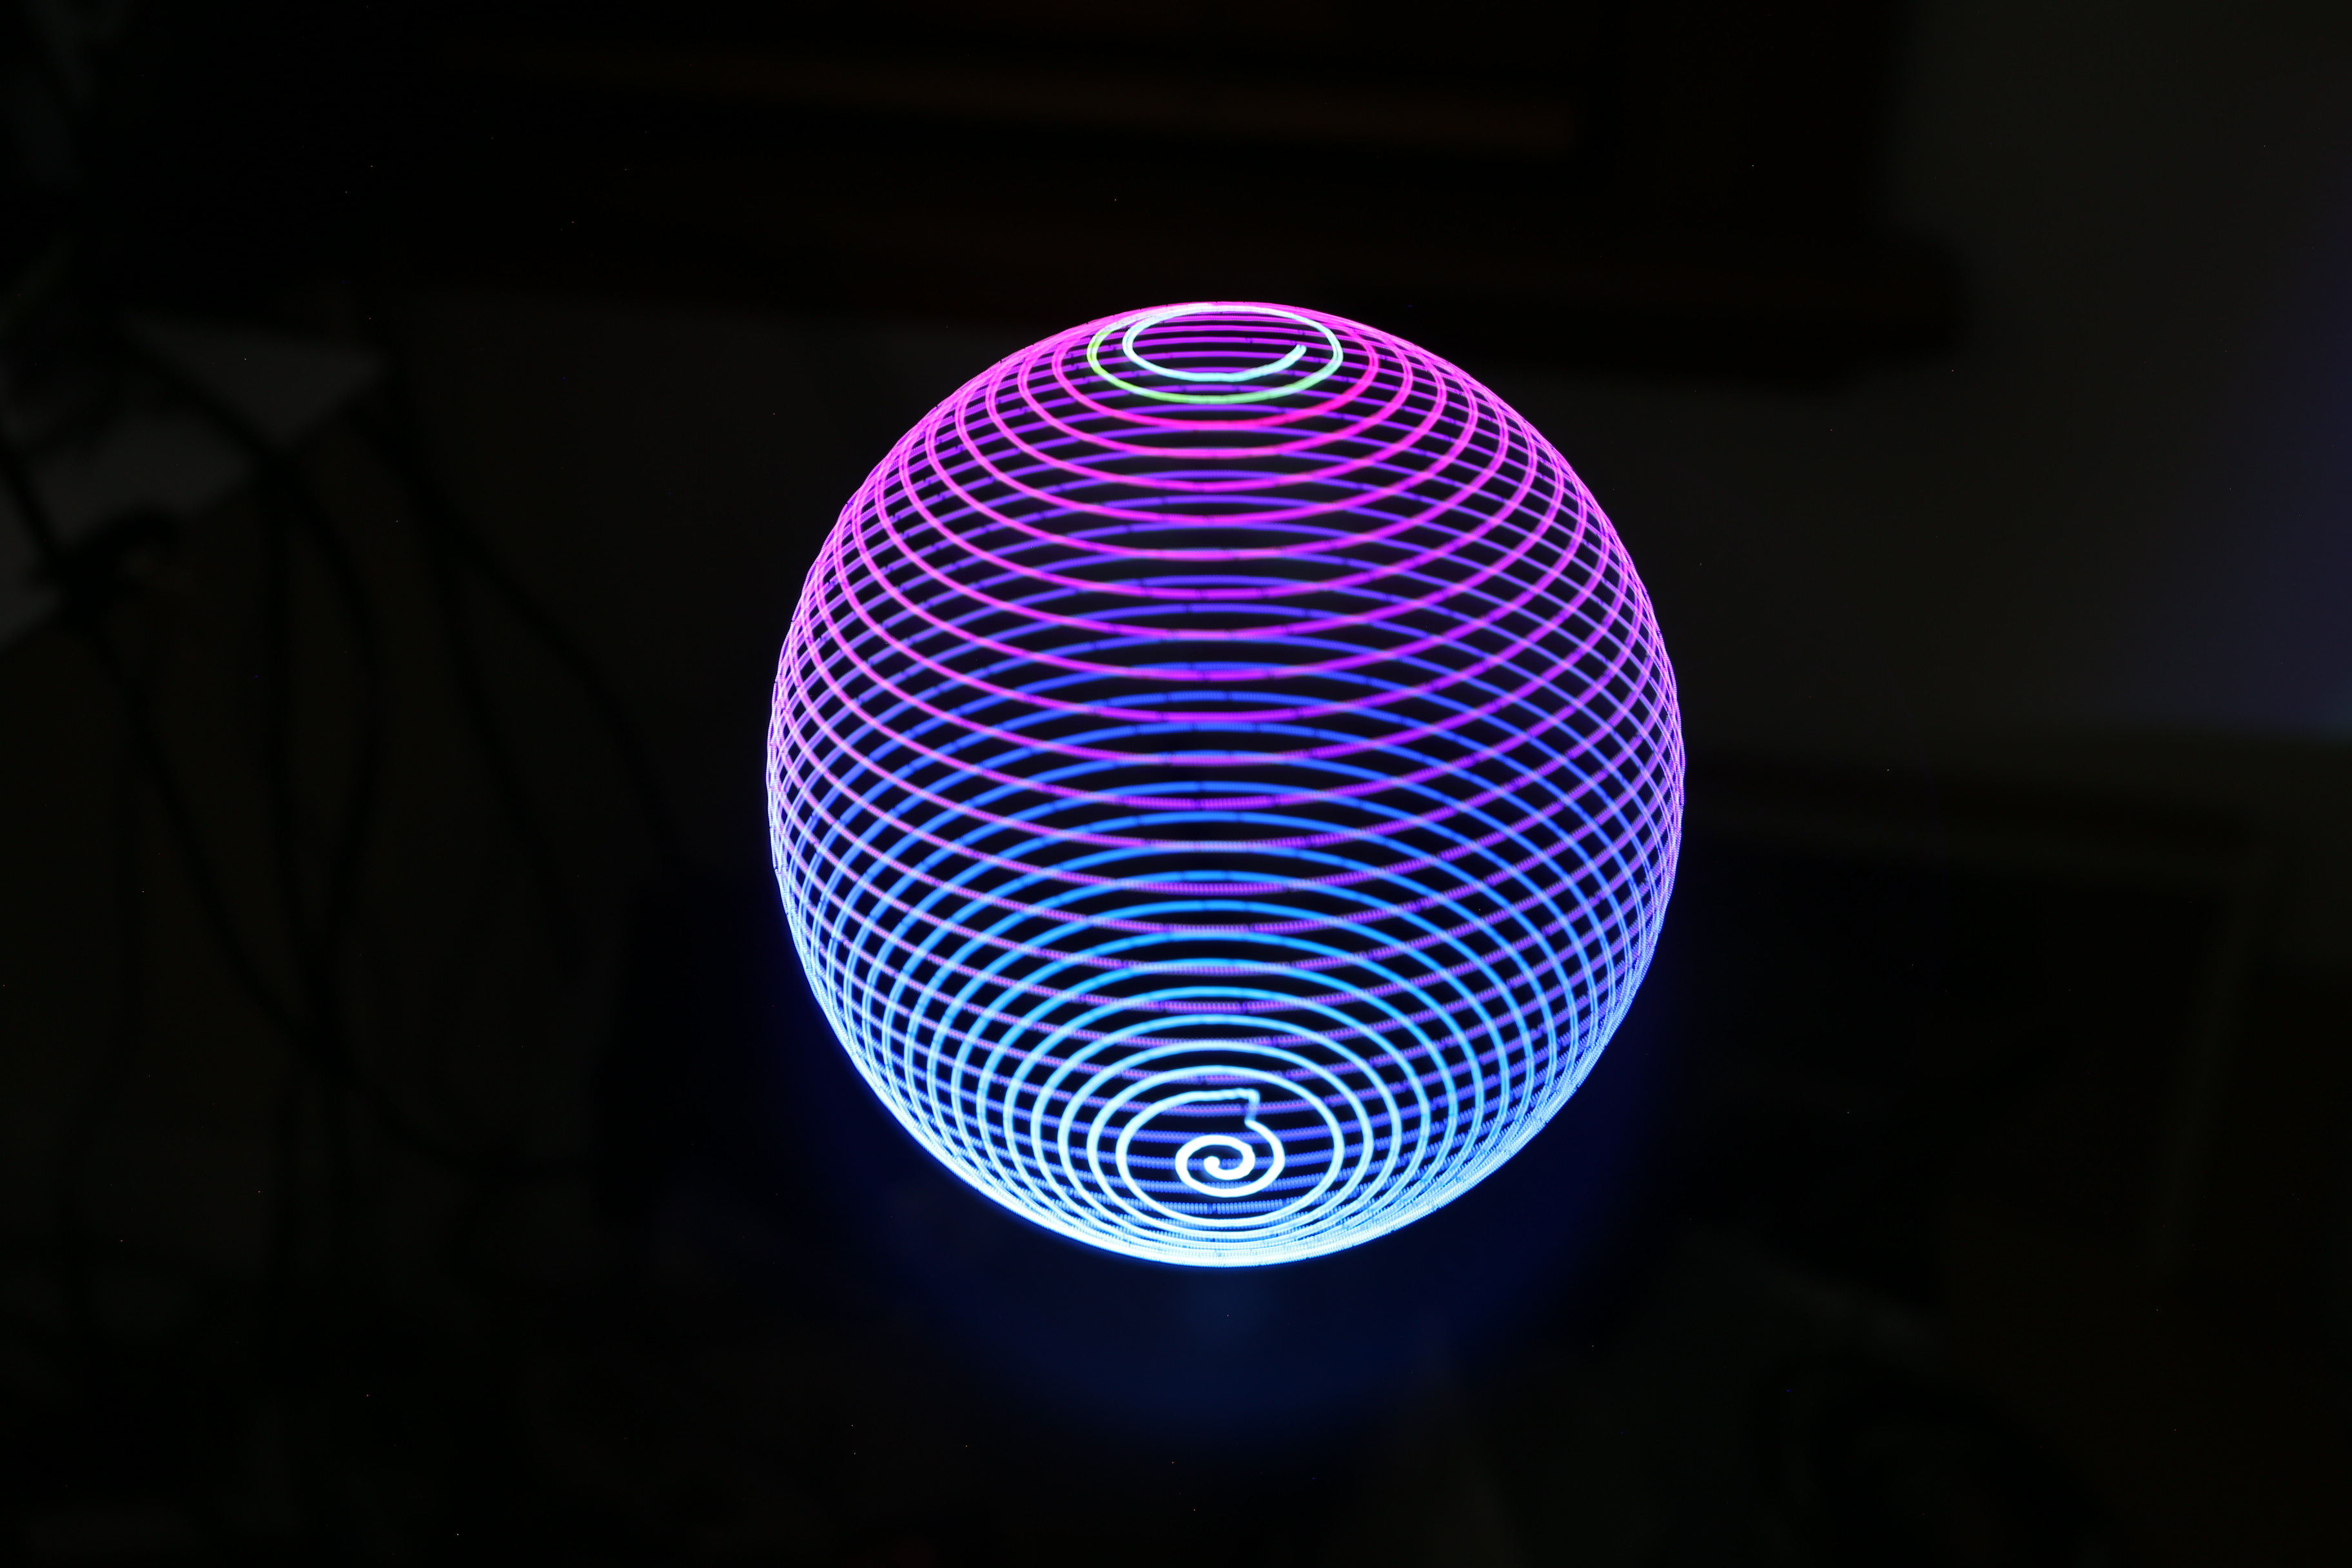 Light-painted spiral sphere